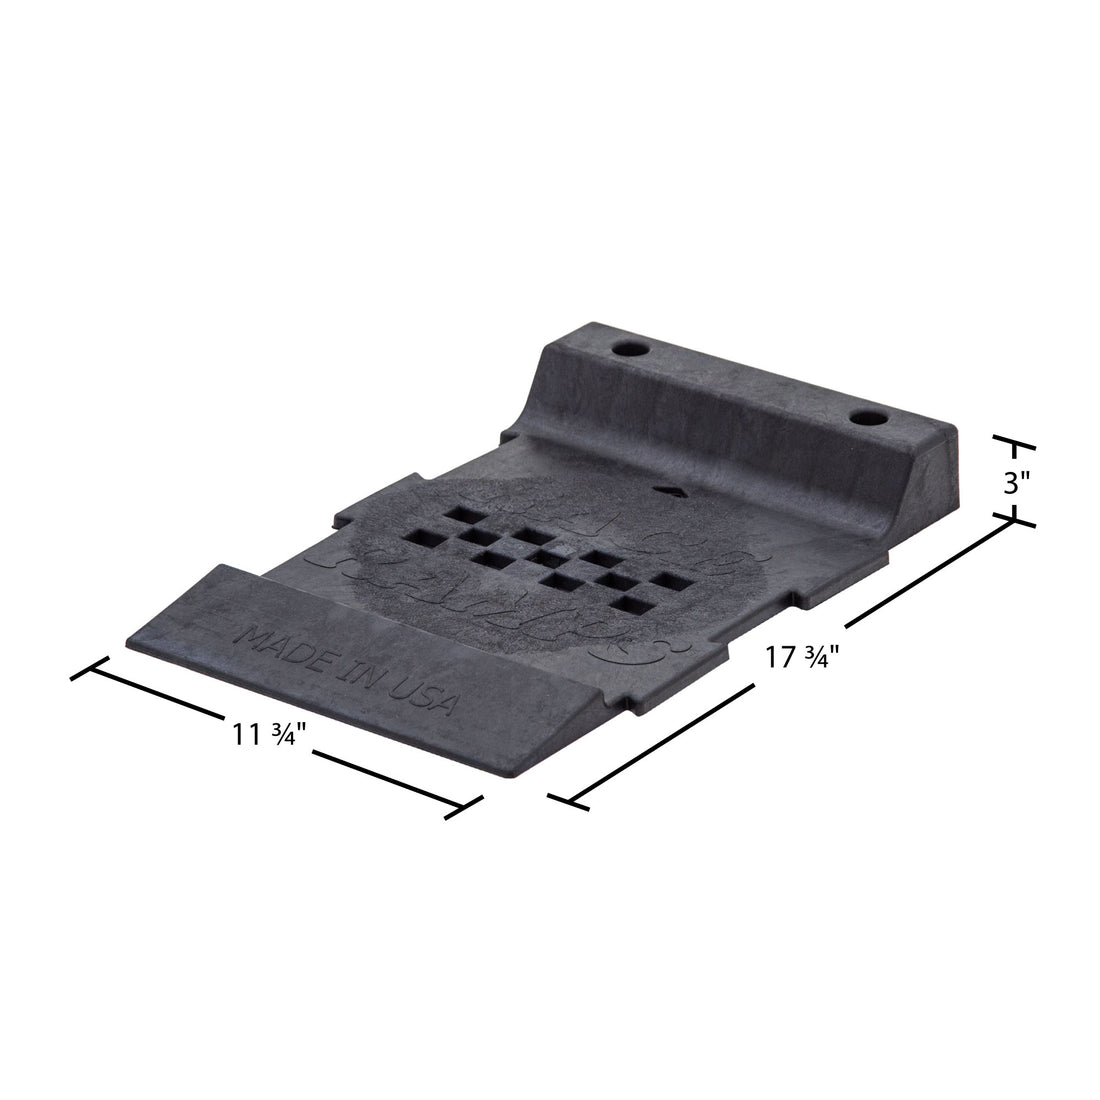 Race Ramps - Pro-Stop Parking Guide (4-pack)